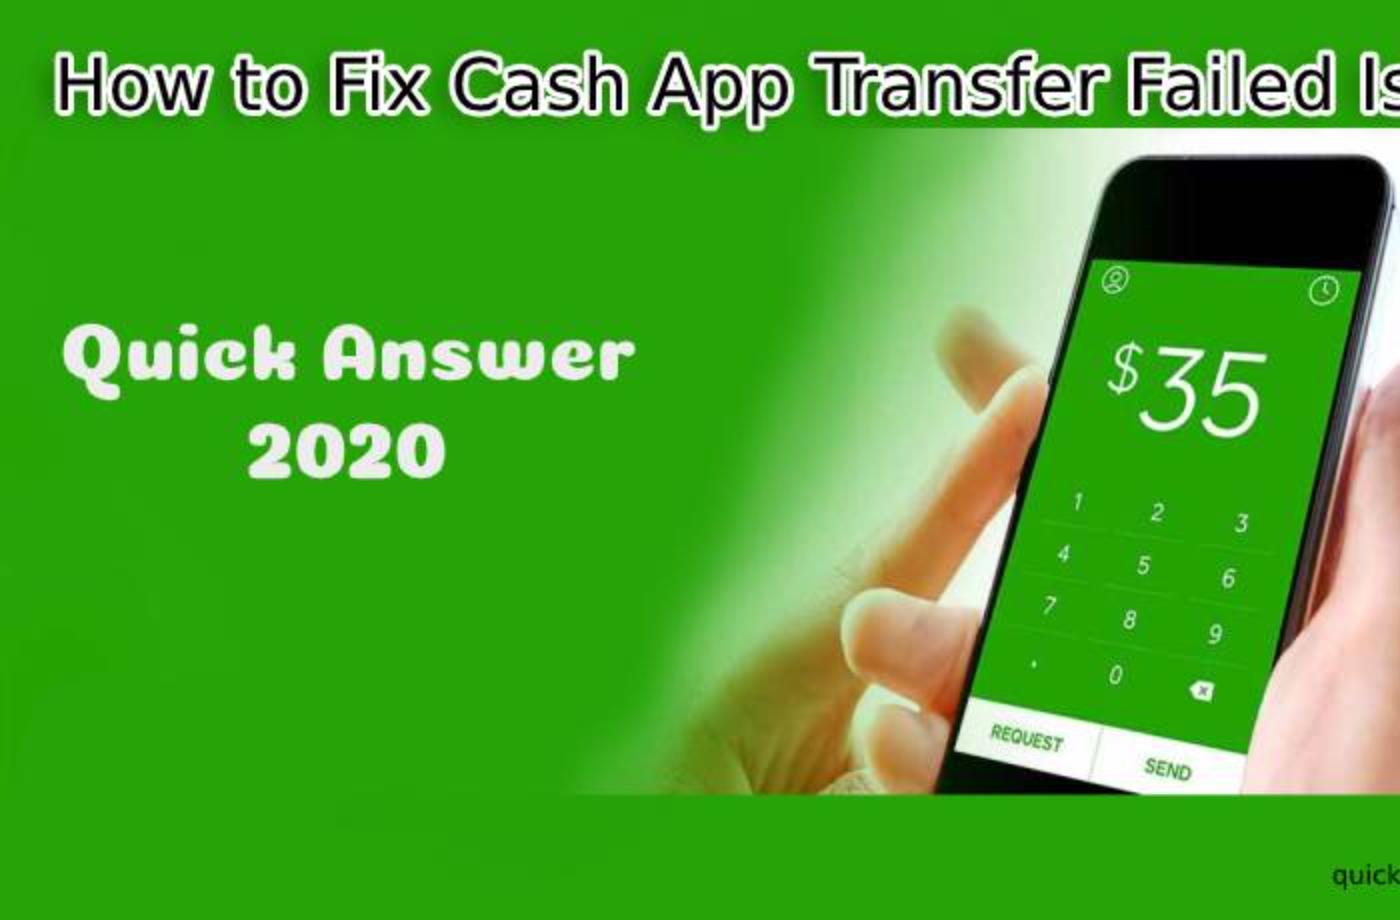 How To Fix Cash App Transfer Failed In Simple Steps Blogy Zeny S R O